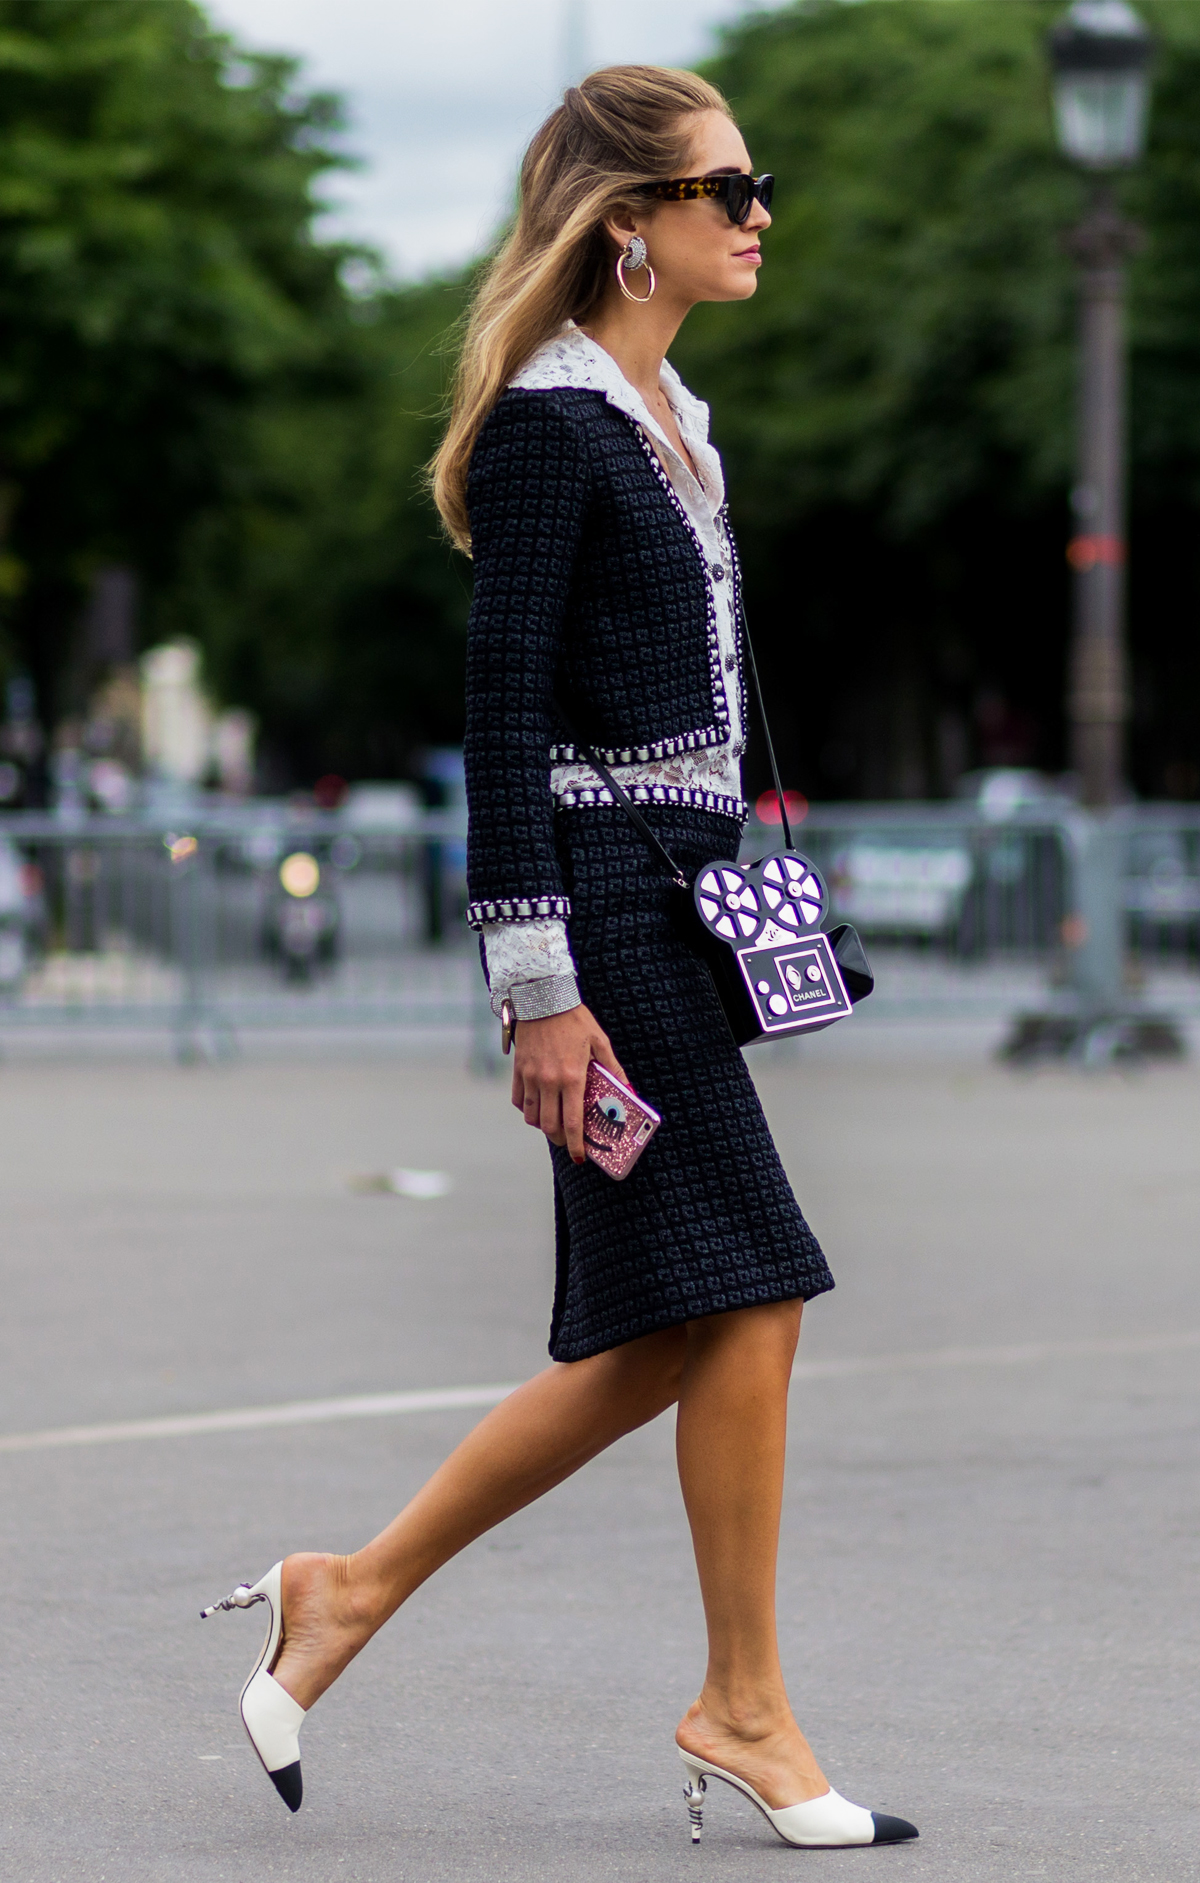 Chanel Pumps: They Will Be Classic | Who What Wear